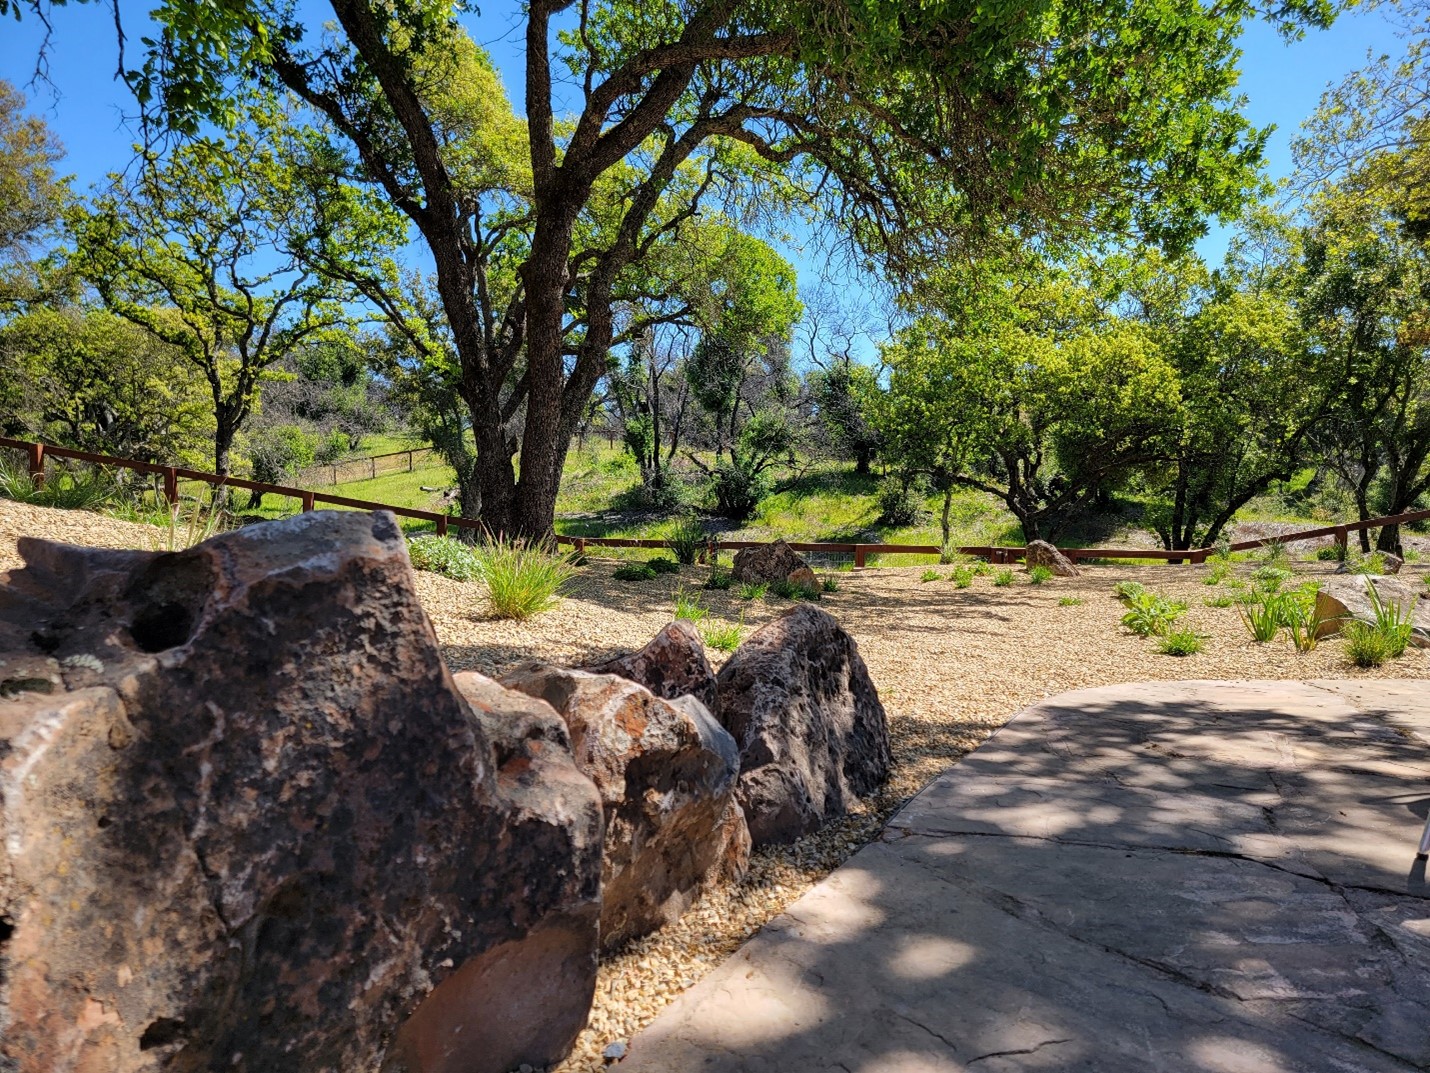 a stone path with large rocks and trees in the background